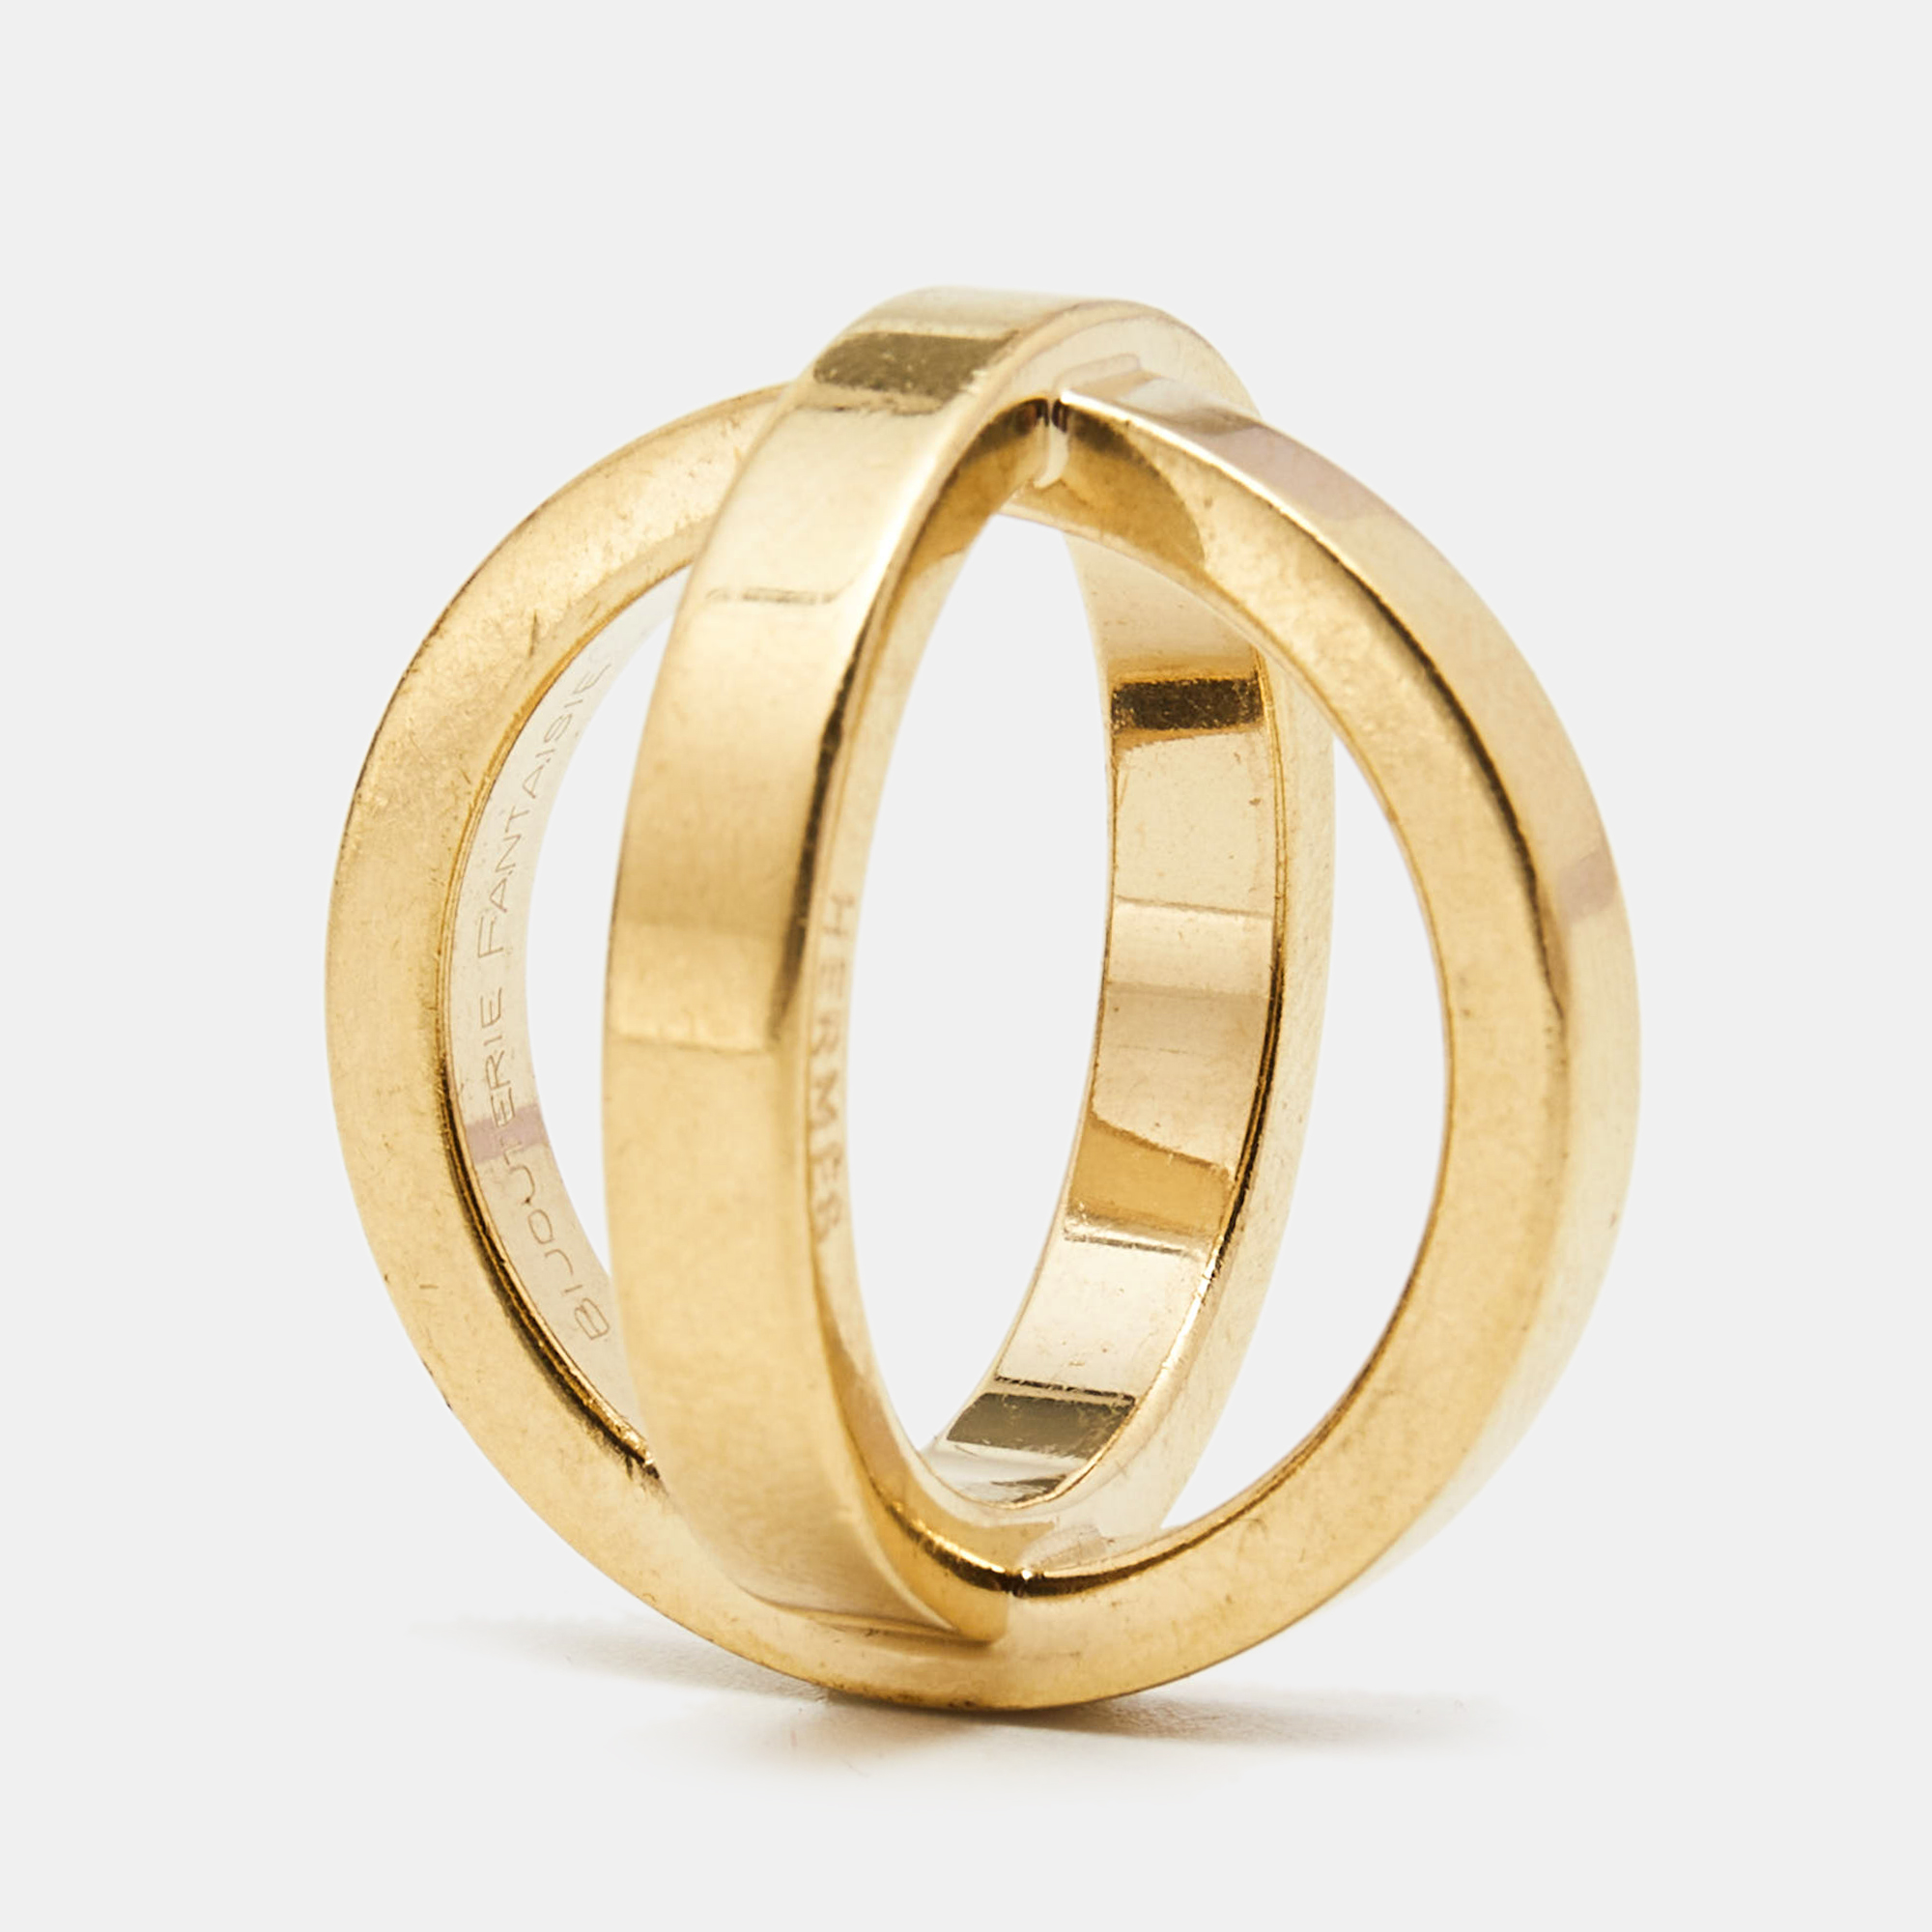 Hermes Bijouterie Fantaisie Gold Plated Cosmos Scarf Ring